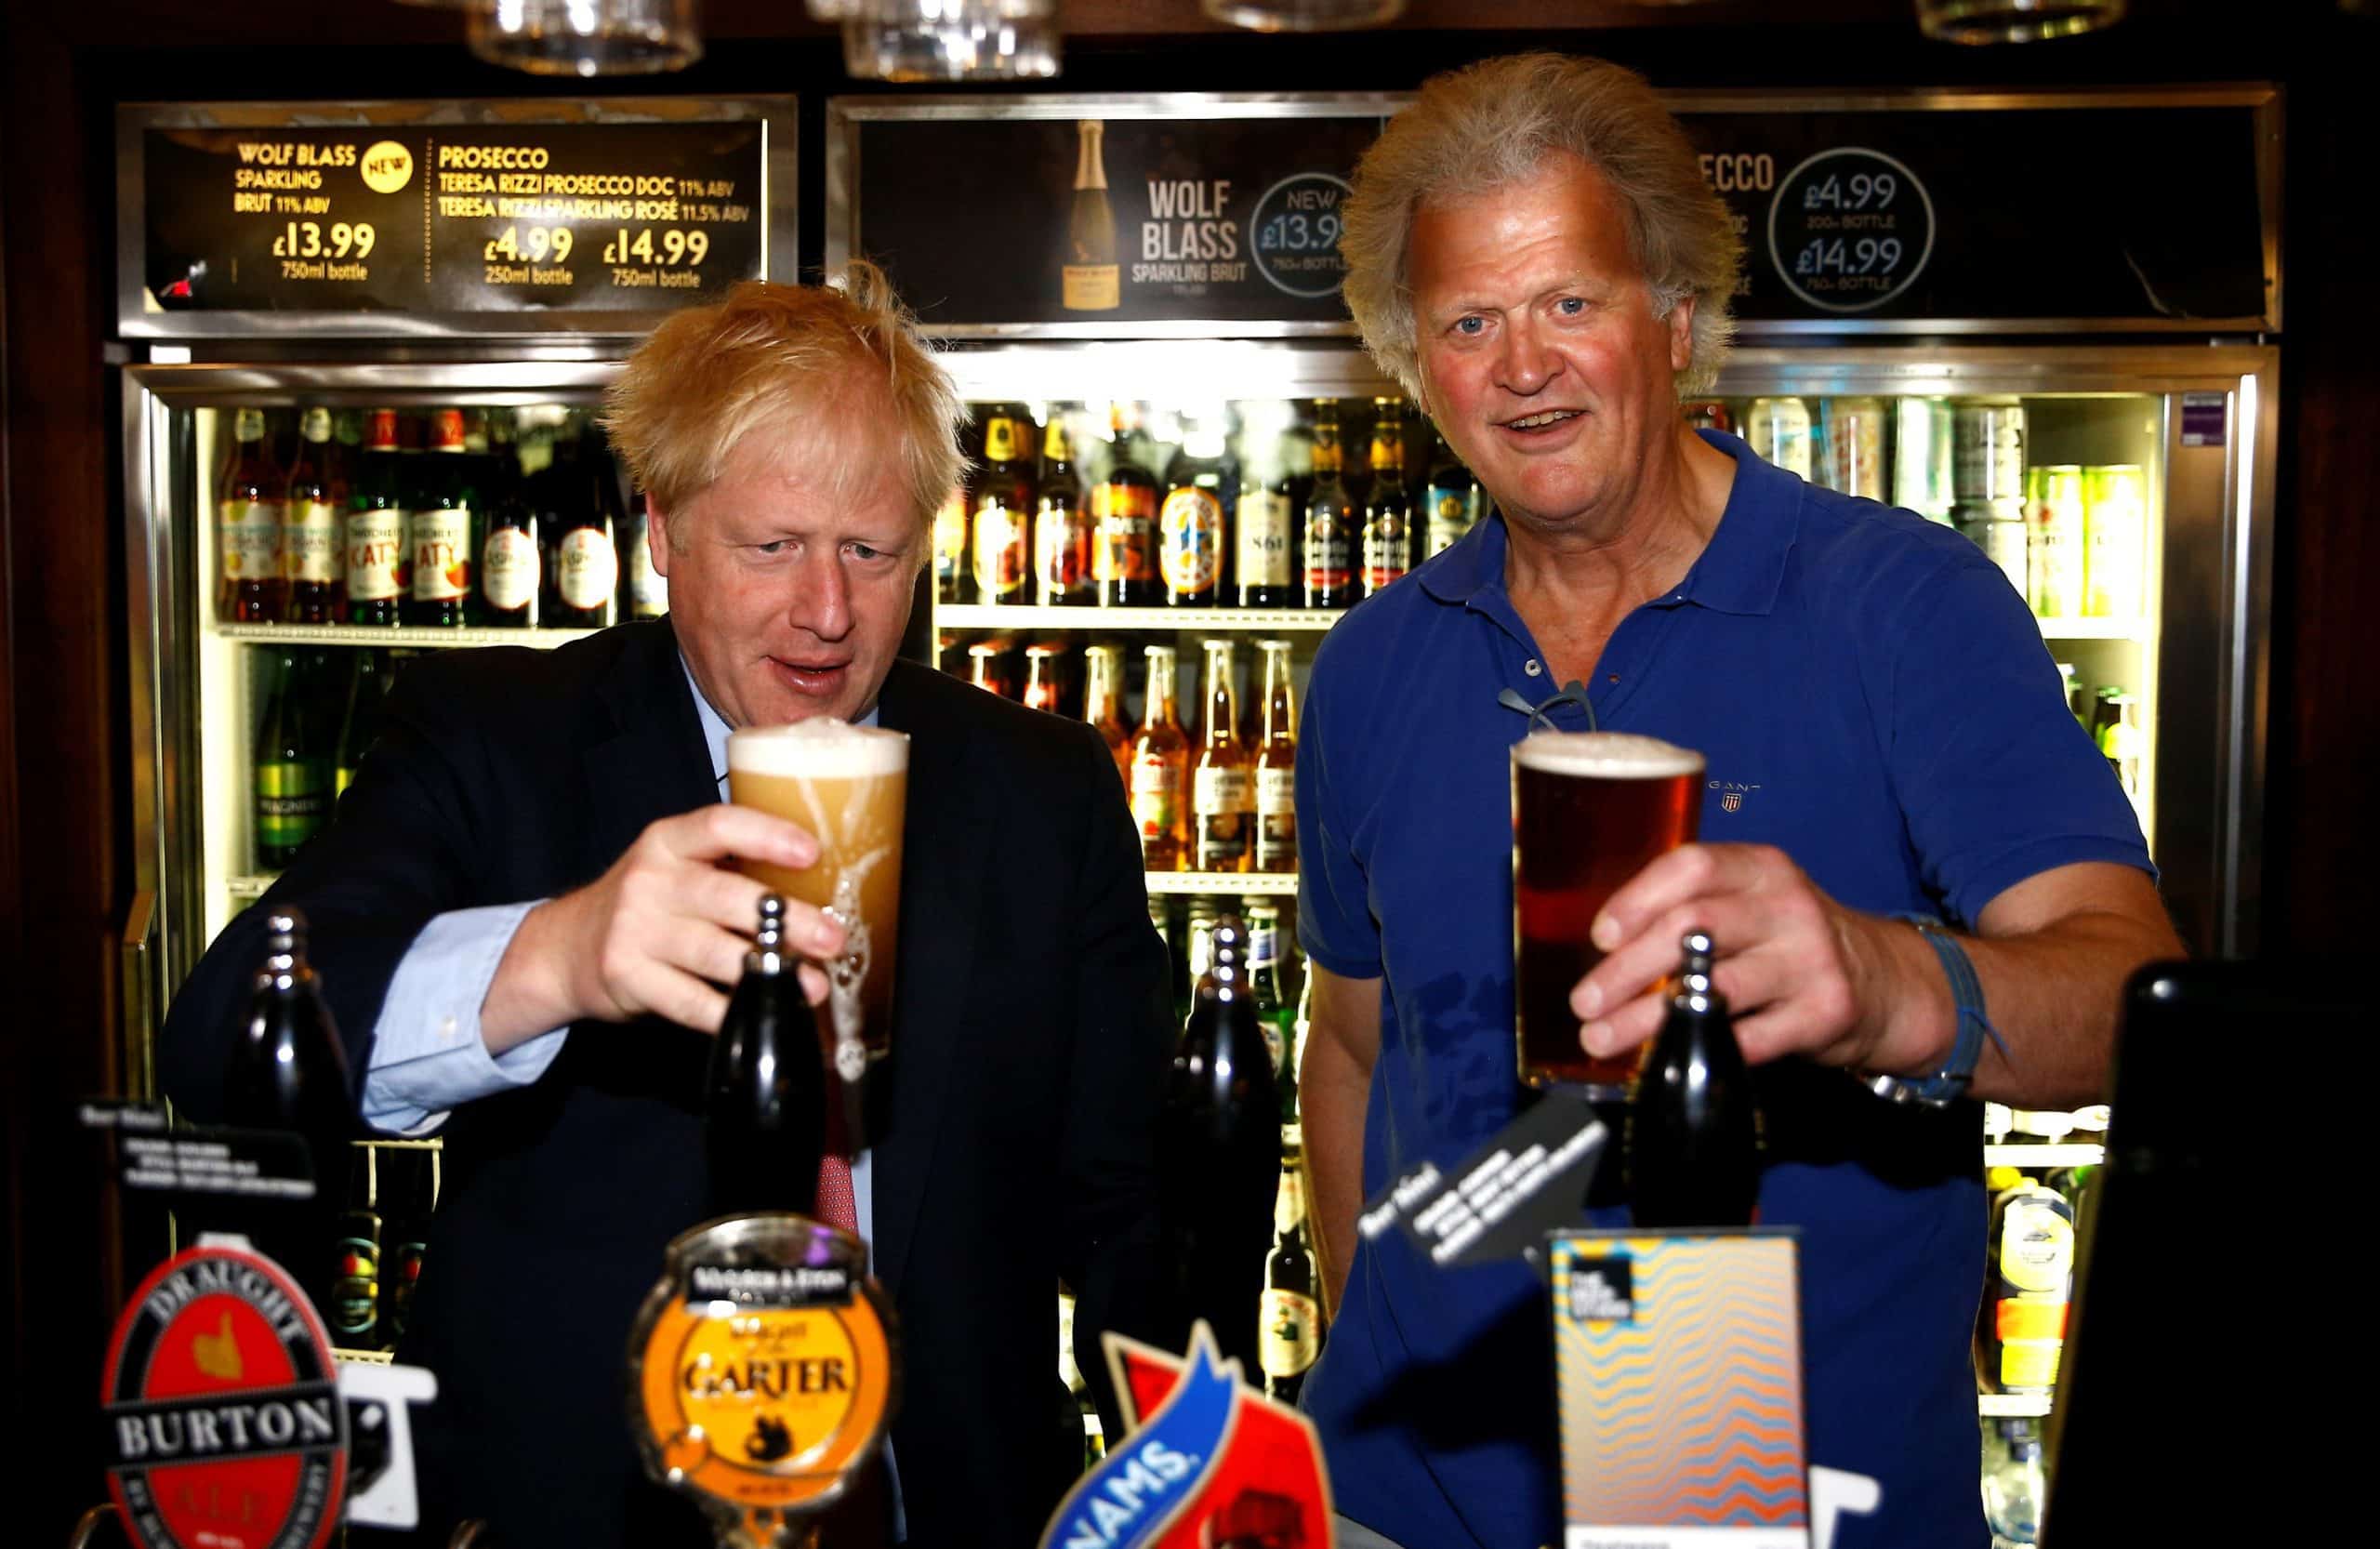 Public fed up with EU warnings over Brexit delays, says Wetherspoons chief